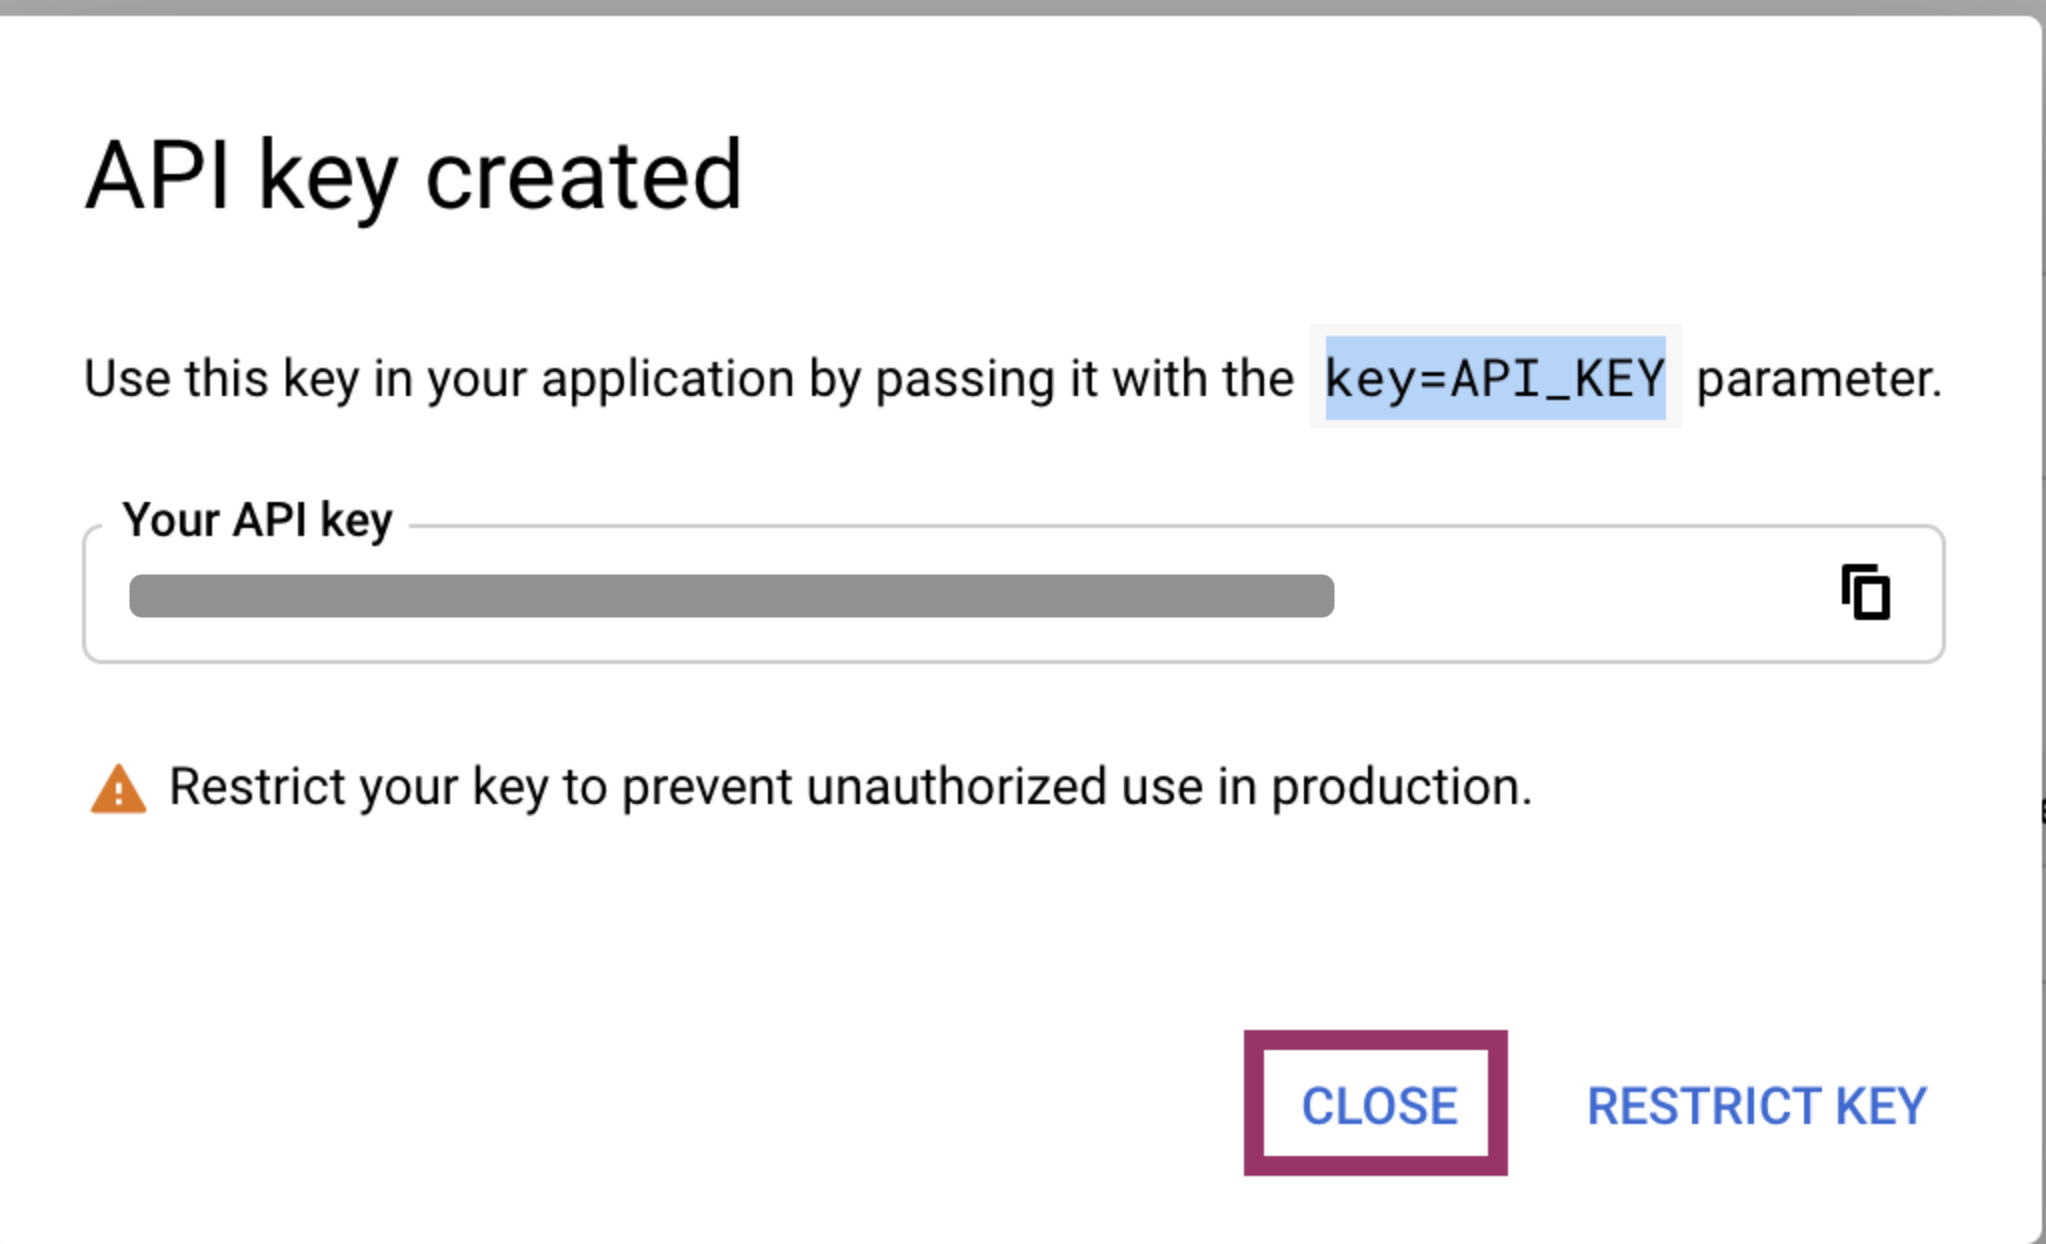 A screenshot of an API key created message, also showing the field with the generated API key